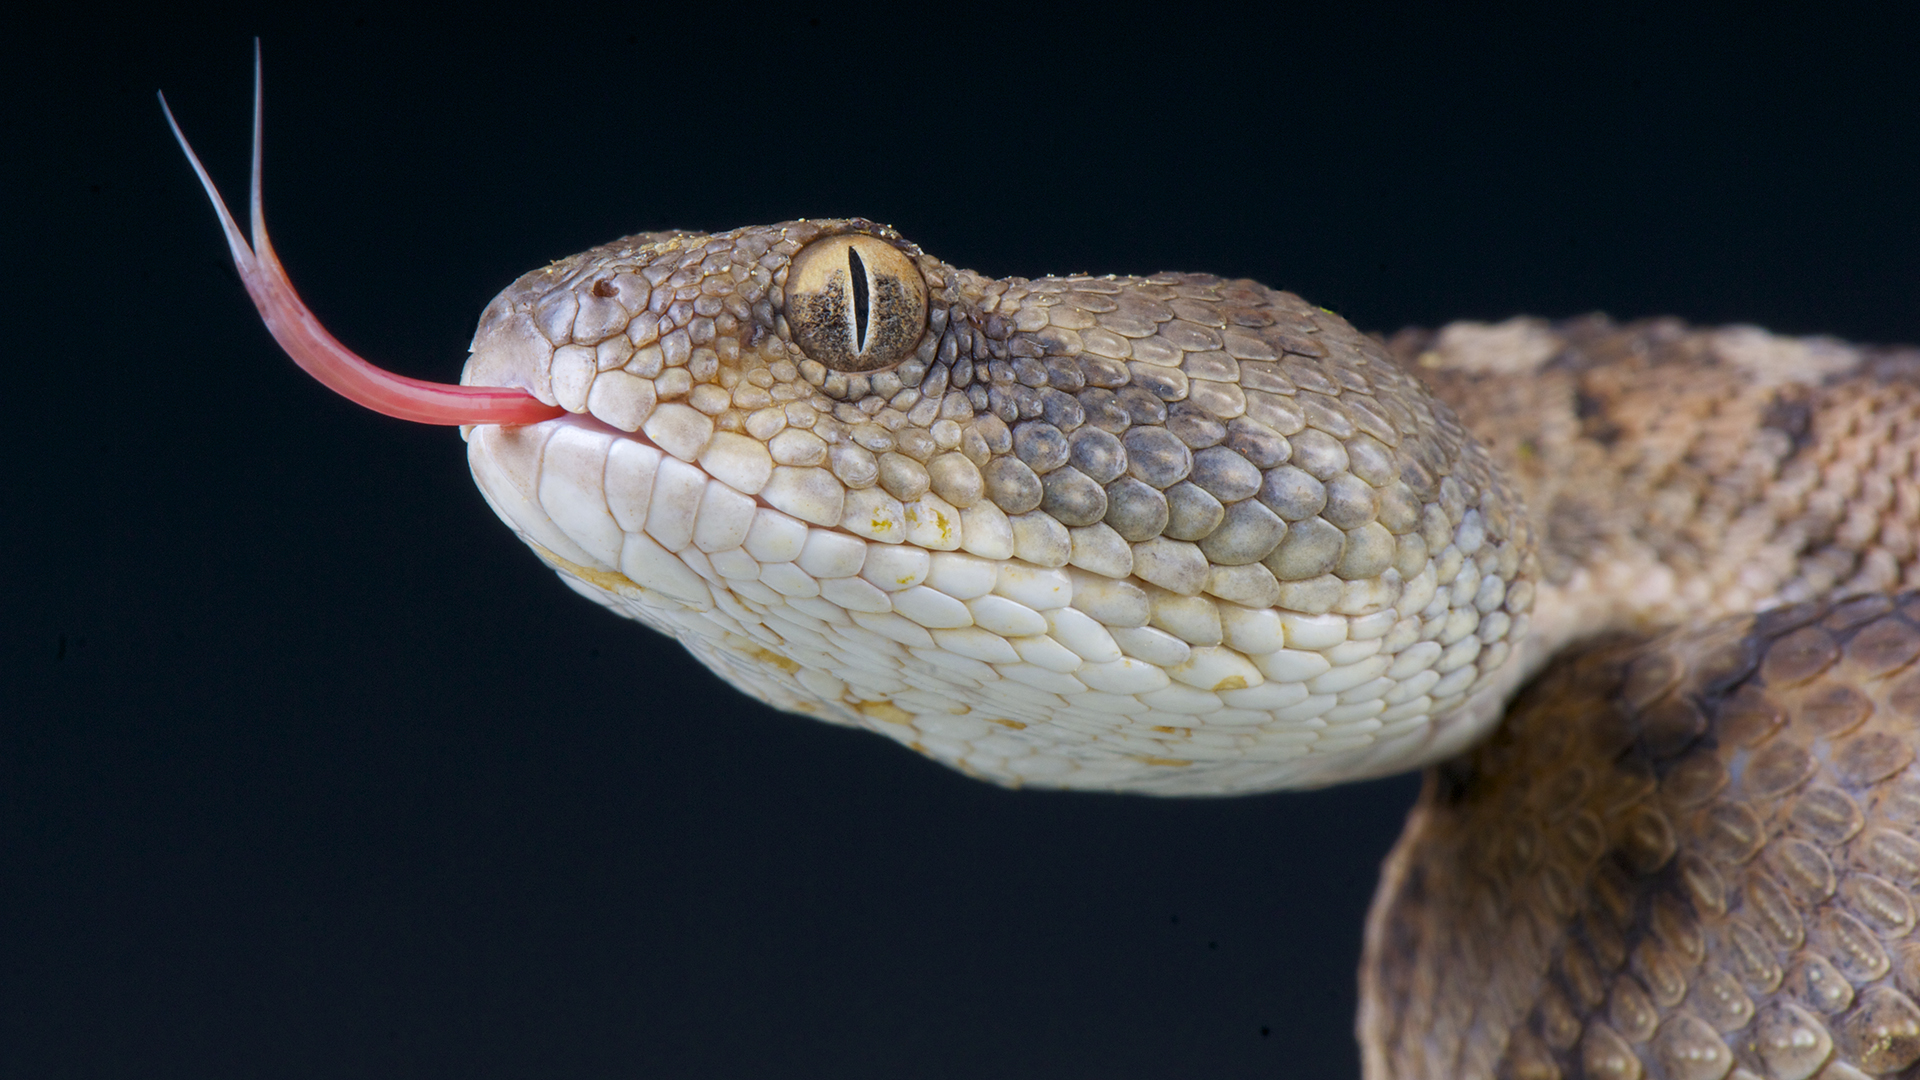 10 of the deadliest snakes | Live Science